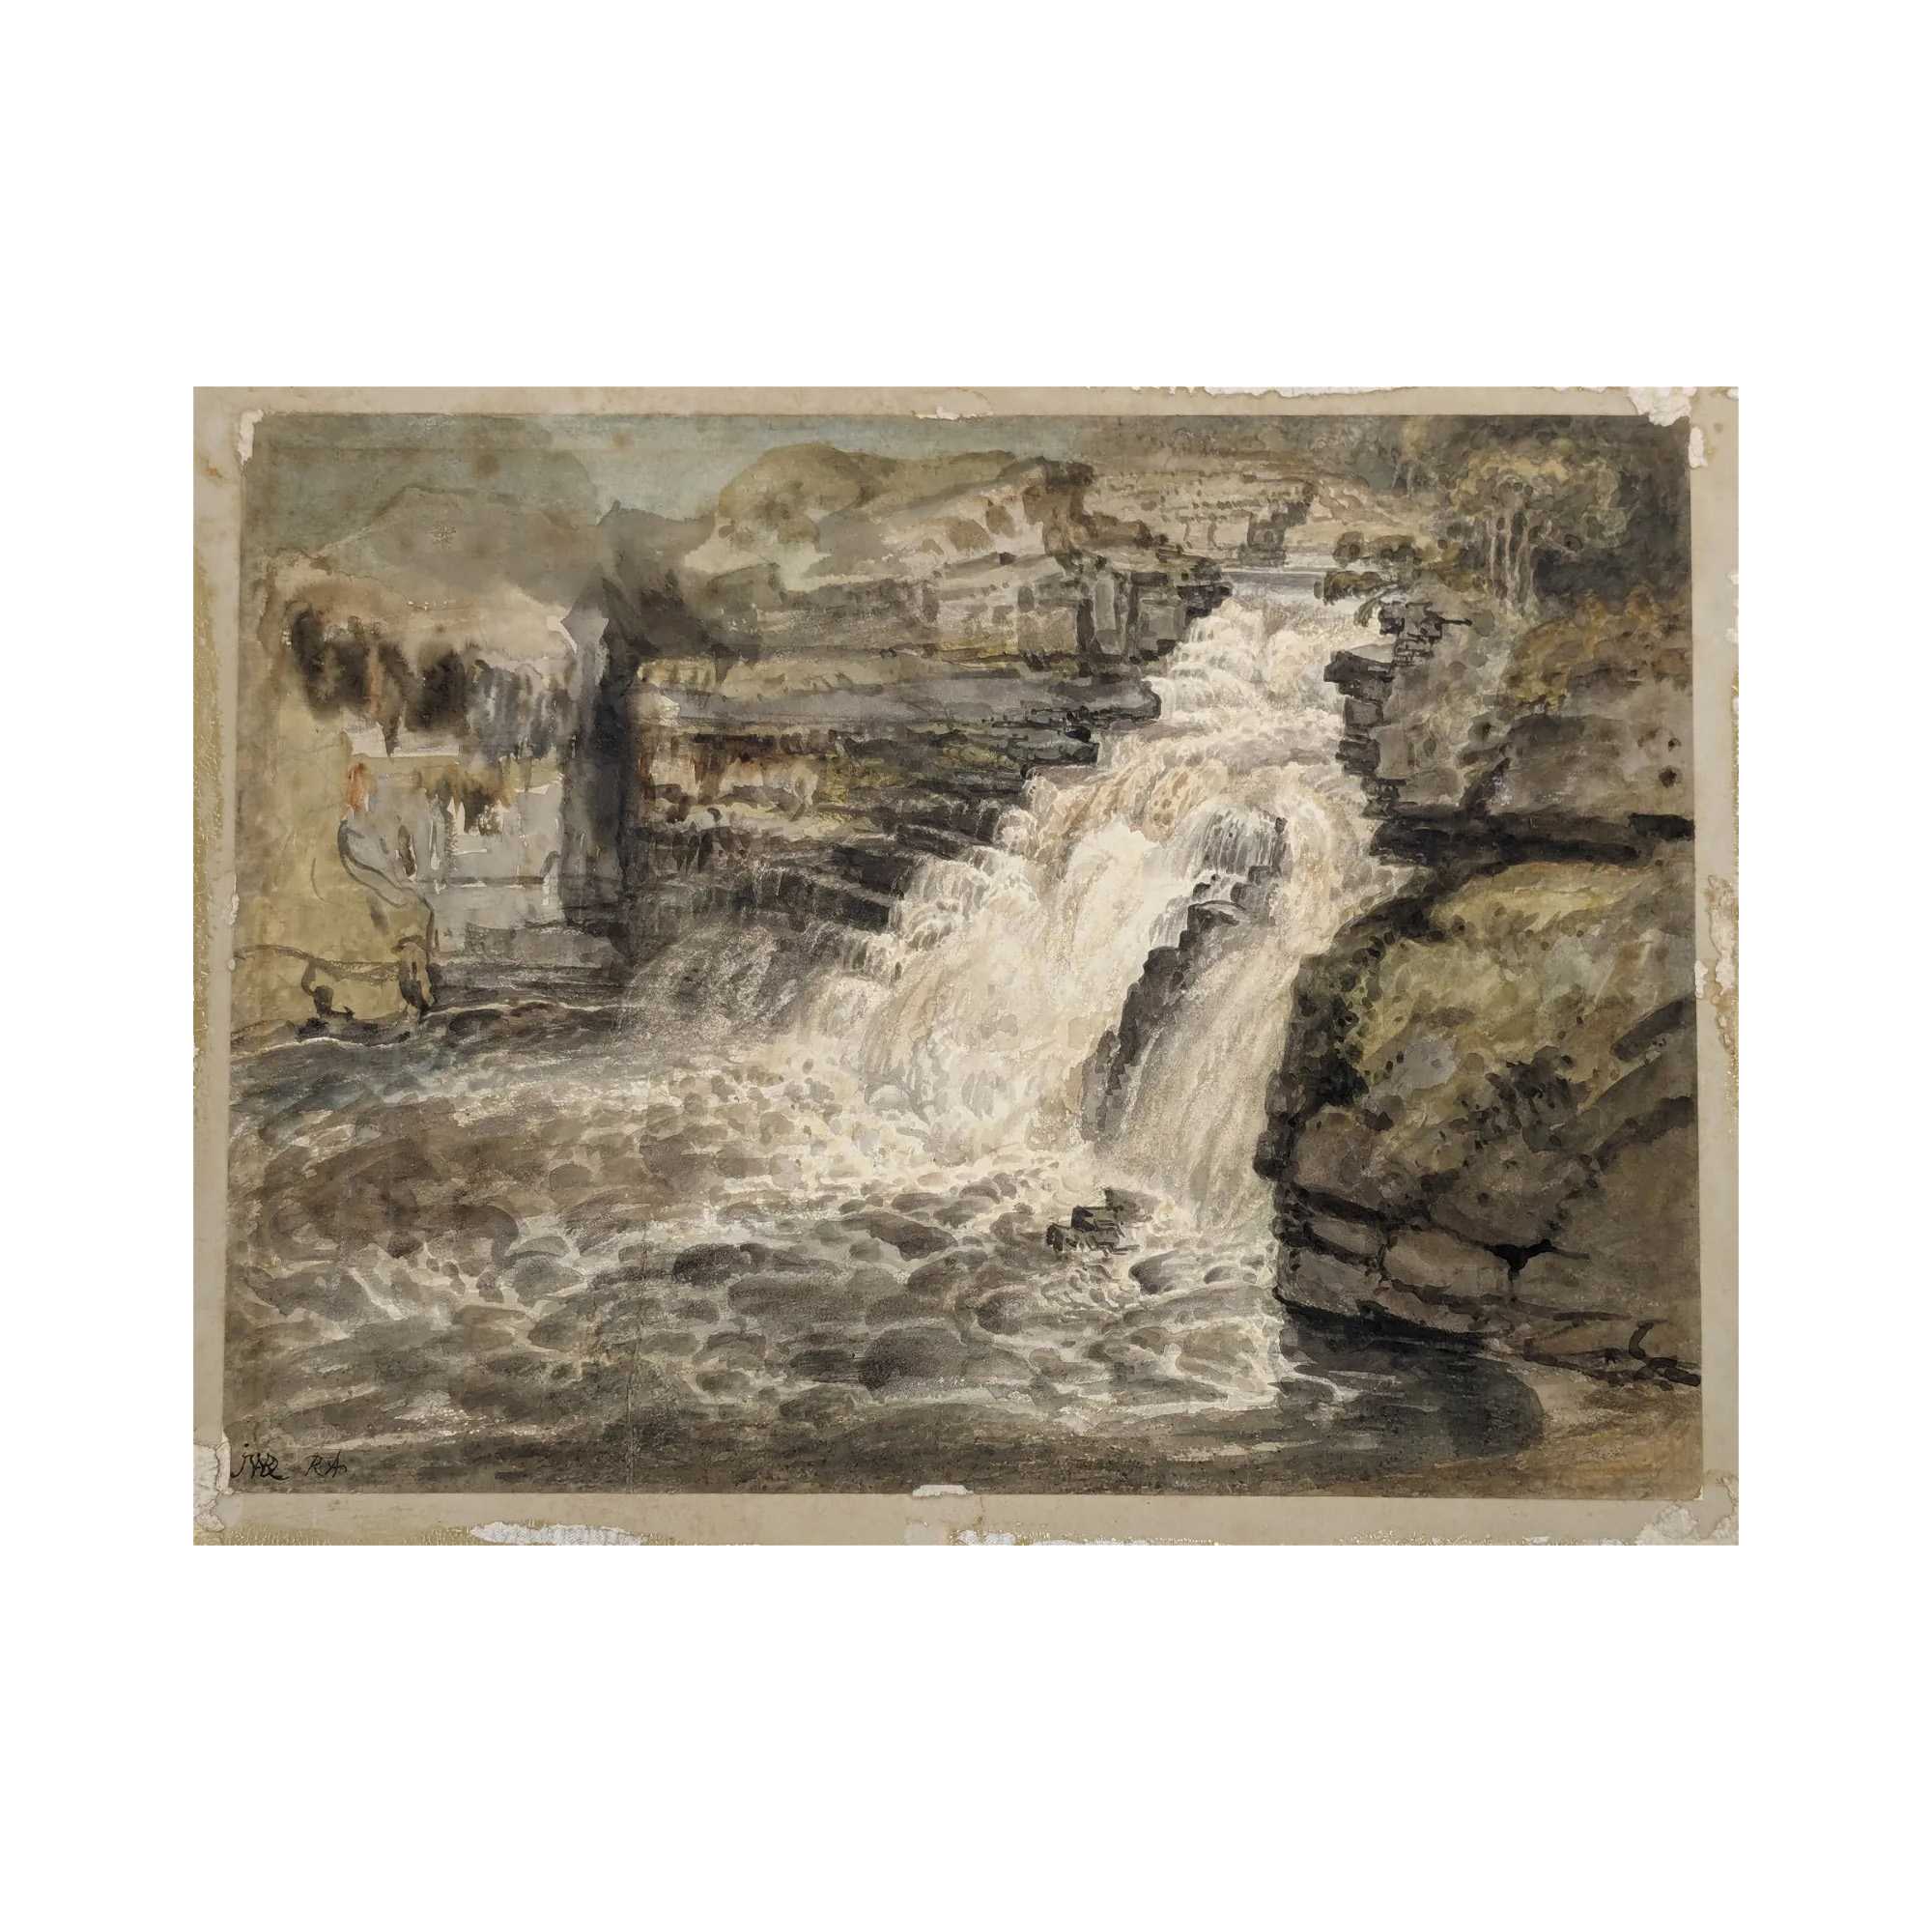 James Ward sketch of the Falls of Clyde, which sold for $18,000 ($22,860 with buyer's premium) at Tremont Auctions.